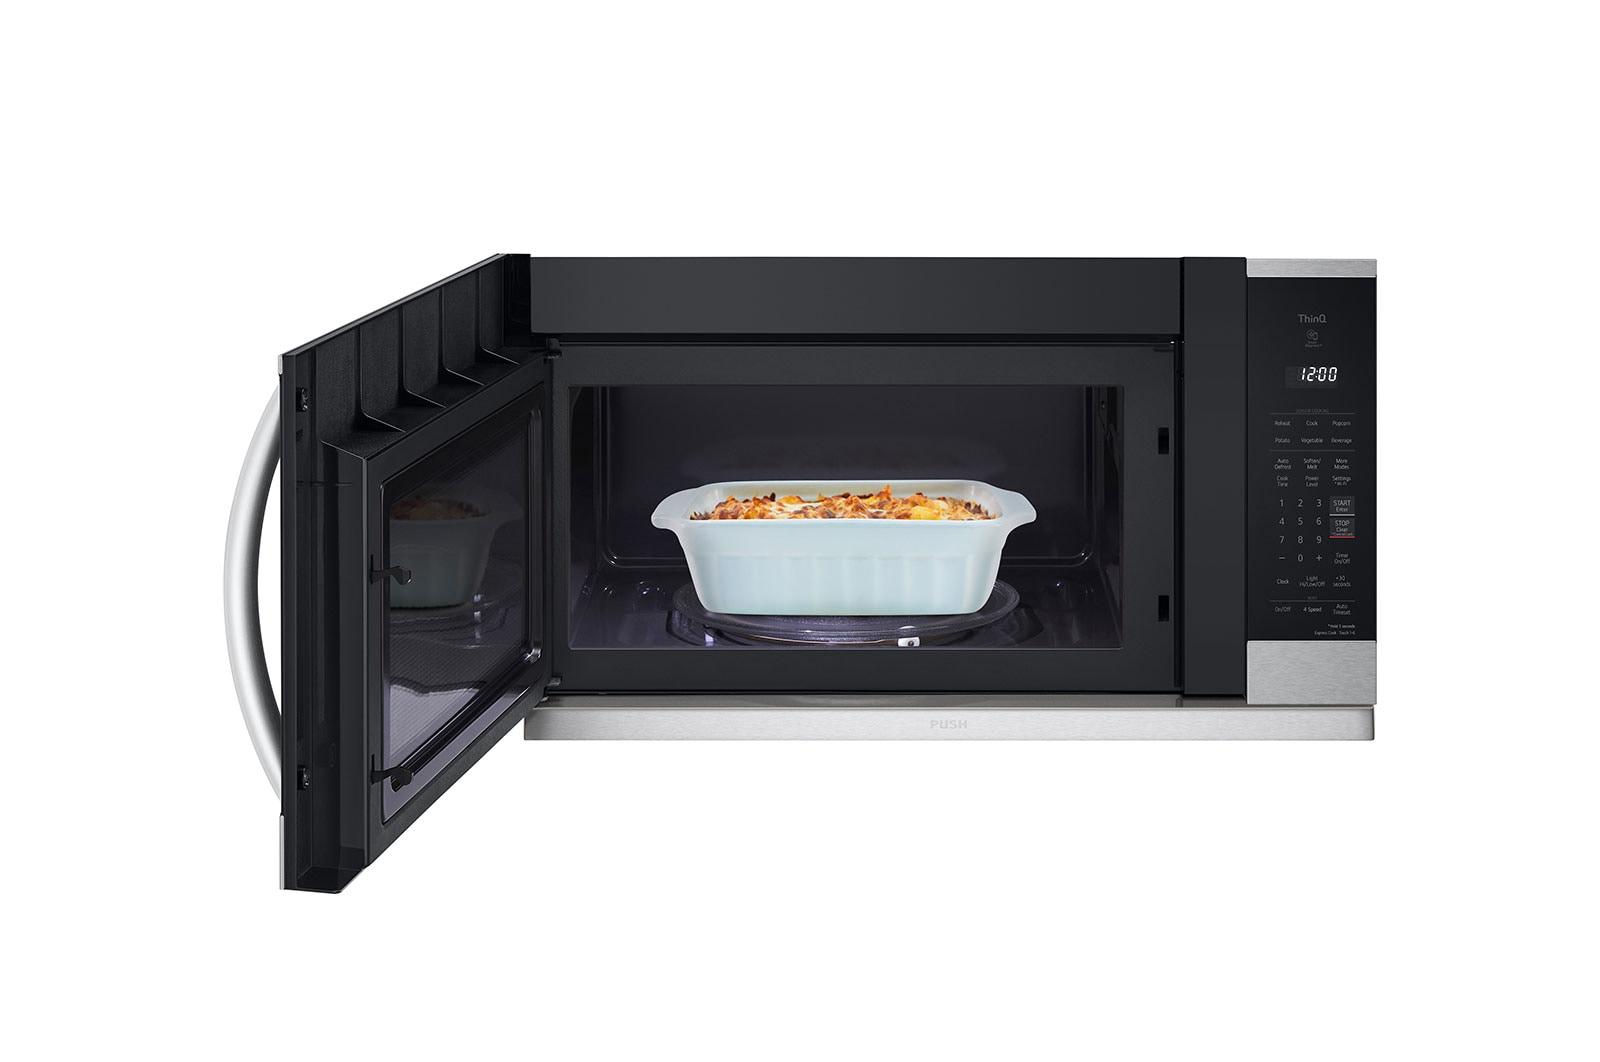 Lg 2.1 cu. ft. Smart Over-the-Range Microwave with ExtendaVent® 2.0